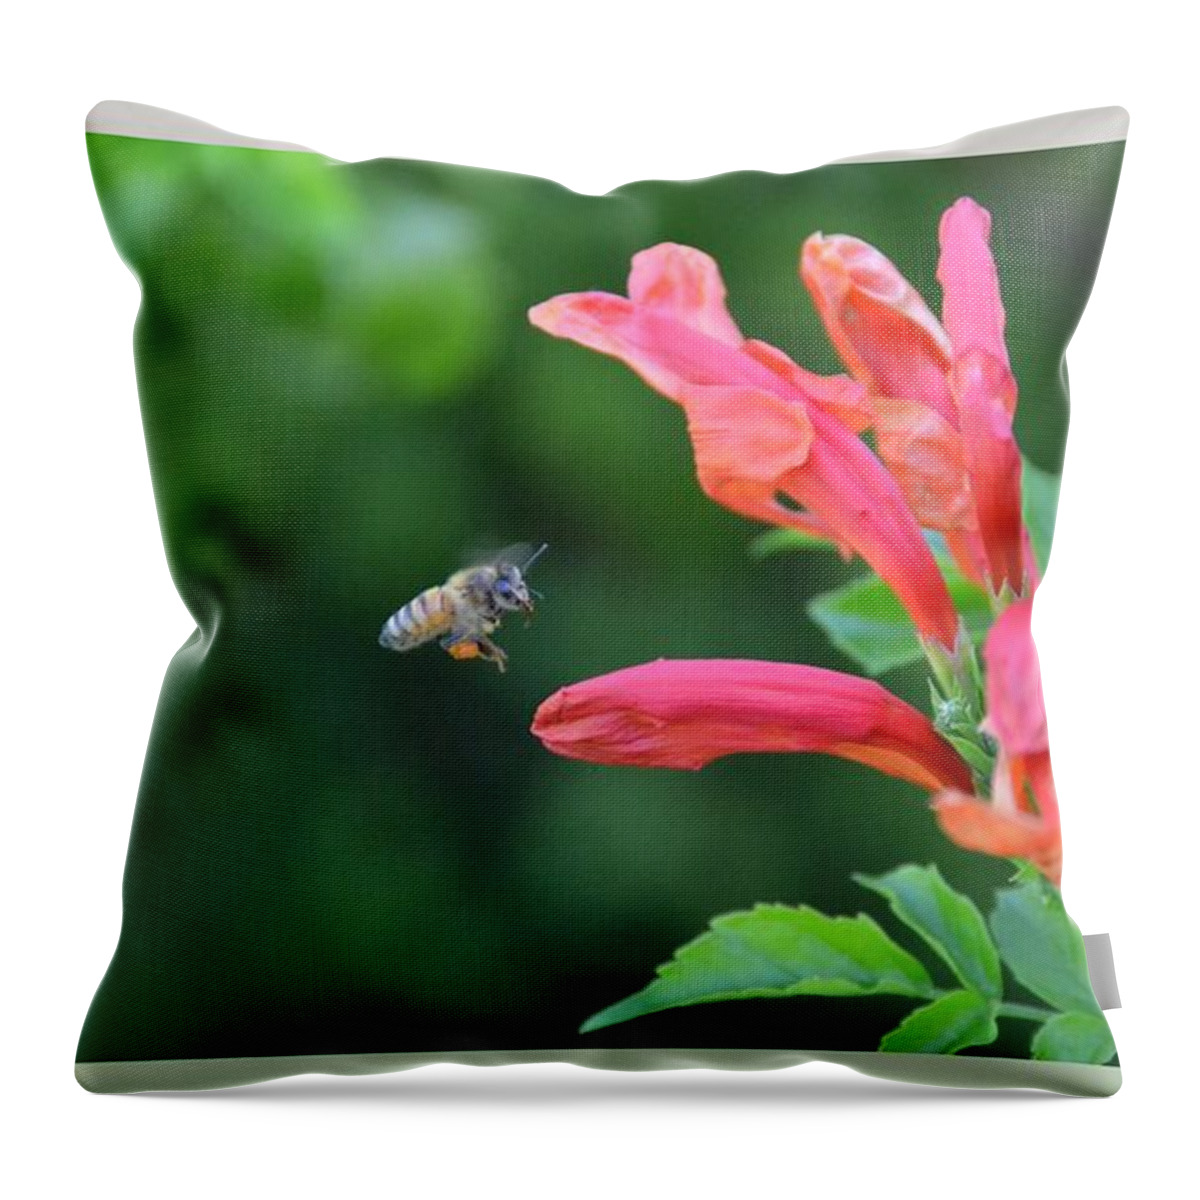 In For The Landing-honeysuckle Throw Pillow featuring the photograph In for the Landing- Honeysuckle by Darla Wood